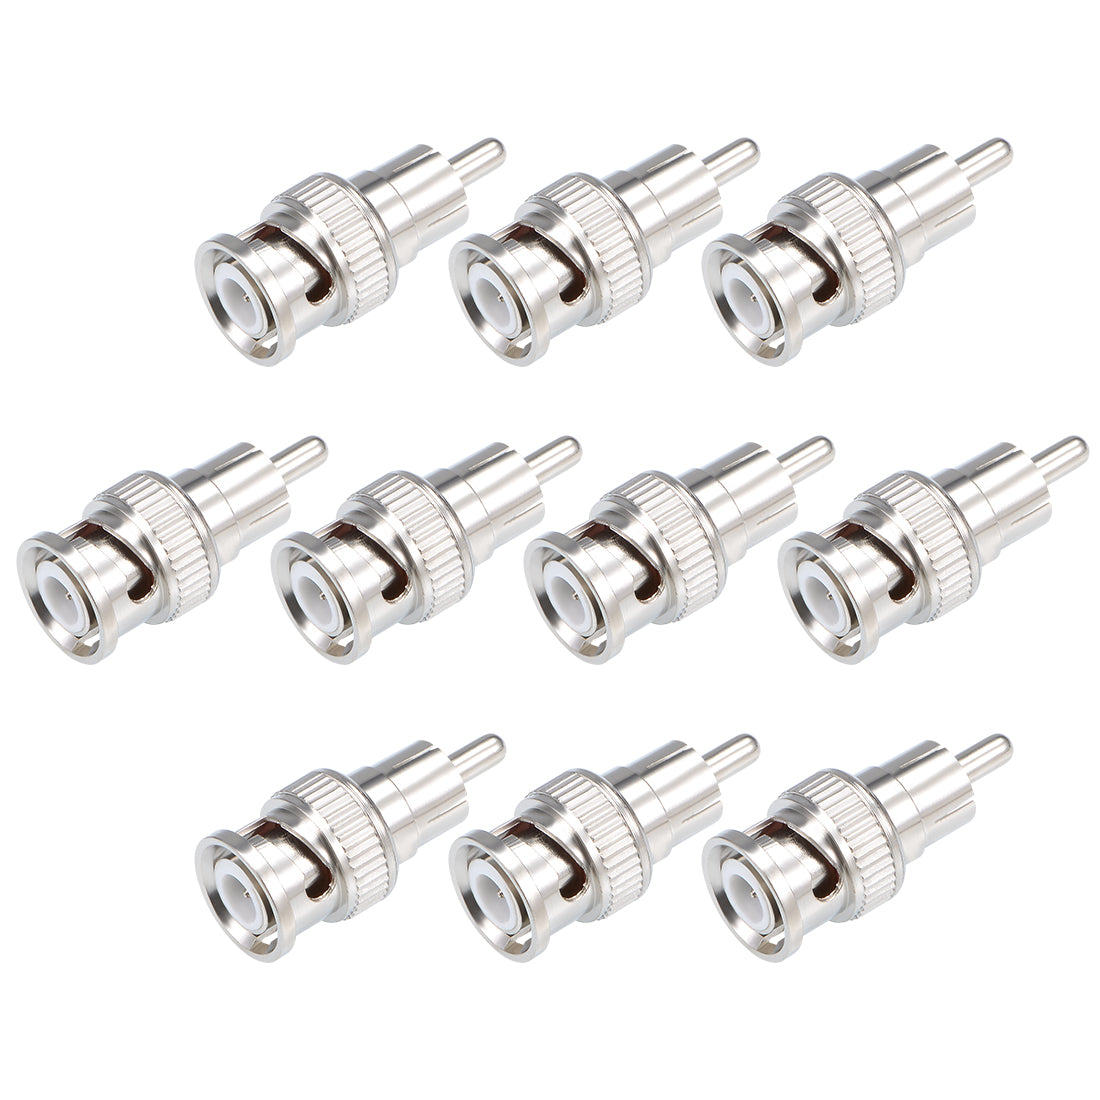 uxcell Uxcell 10Pcs BNC Male to RCA Male Adapter Coaxial Cable Connector for CCTV Security Camera